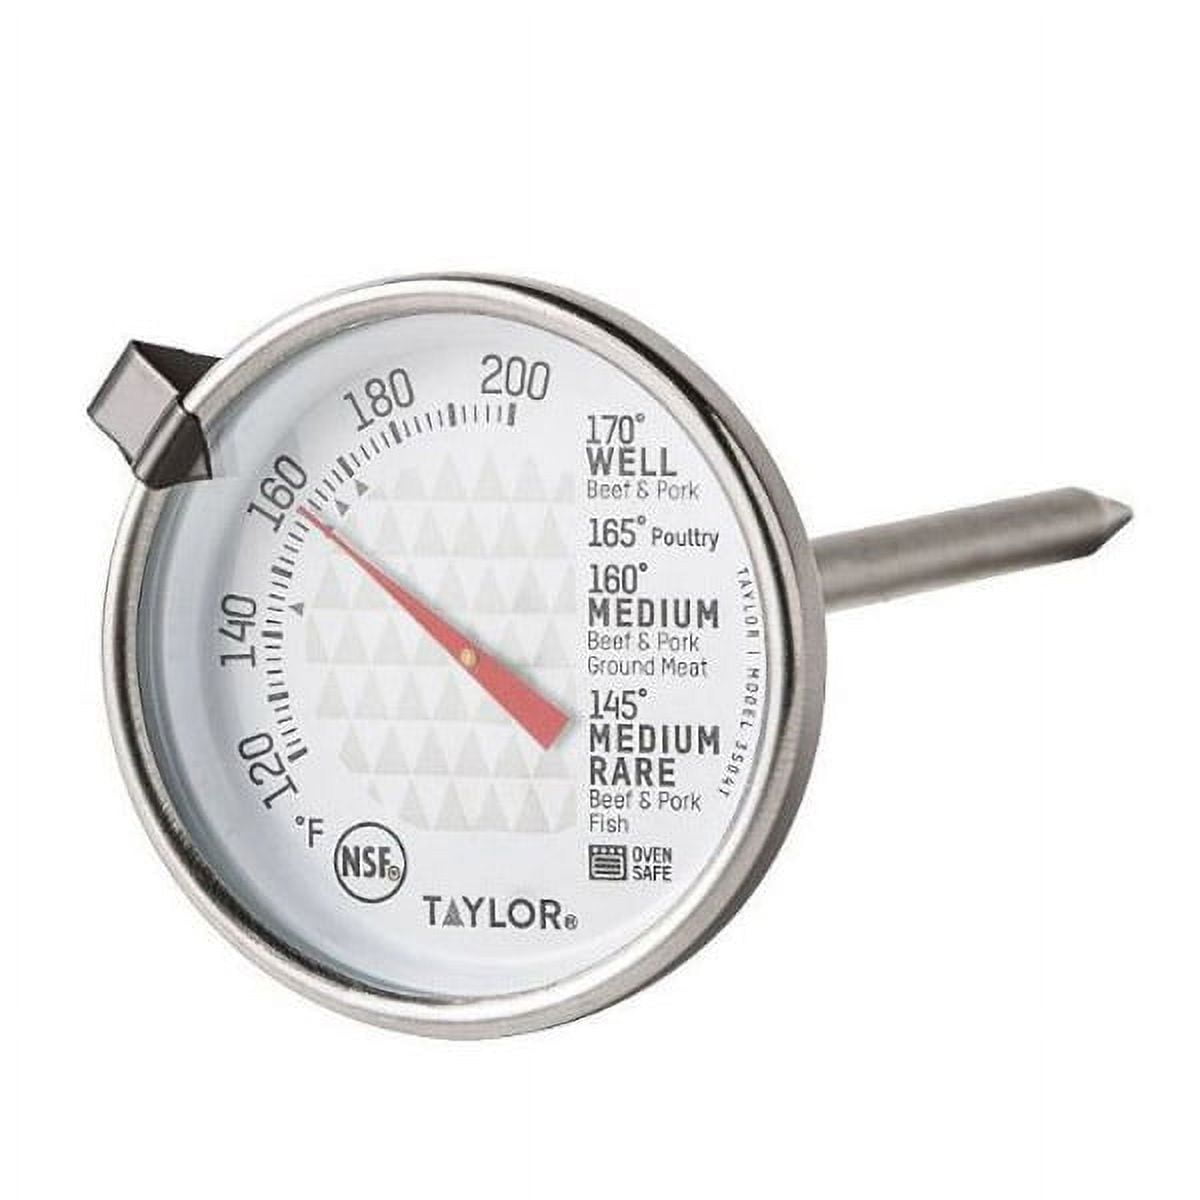  Taylor 3Pc Kitchen and Food Thermometer Set - Includes: 1 Super  Fast Digital Thermocouple Thermometer, 1 Leave-in Oven/Grill-Safe Analog  Meat Thermometer, and 1 Oven Thermometer : Industrial & Scientific